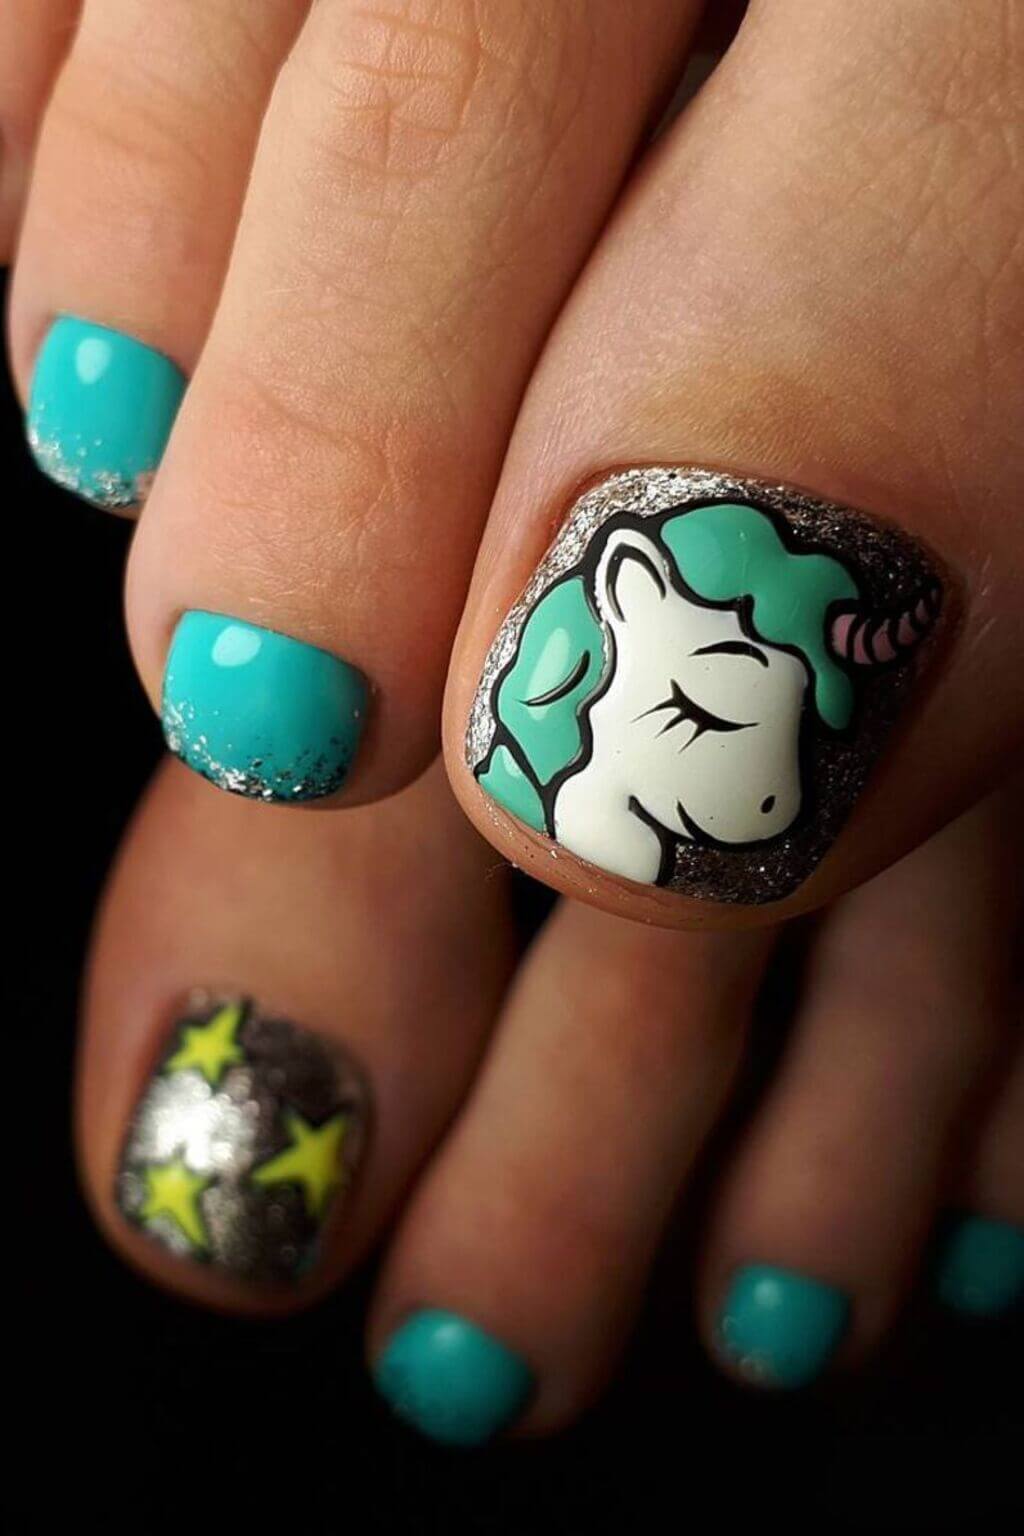 A woman's toe with a unicorn on it
